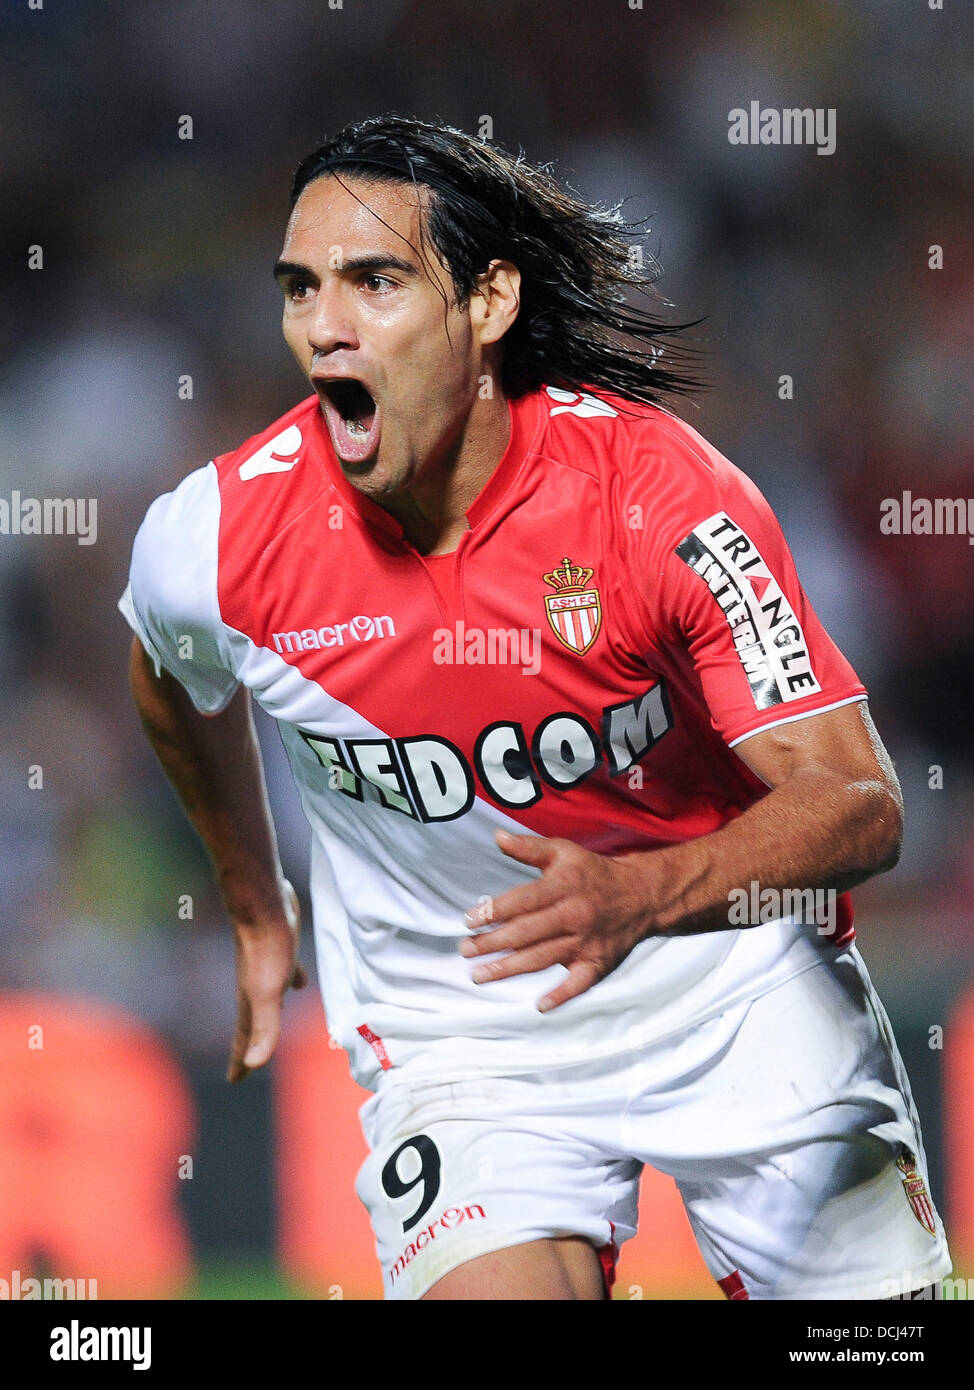 18.08.2013 Monaco. Radamel FALCAO celebrates his goal during the French Ligue 1 game between Monaco and Montpellier from the Stade Louis II stadium. Stock Photo